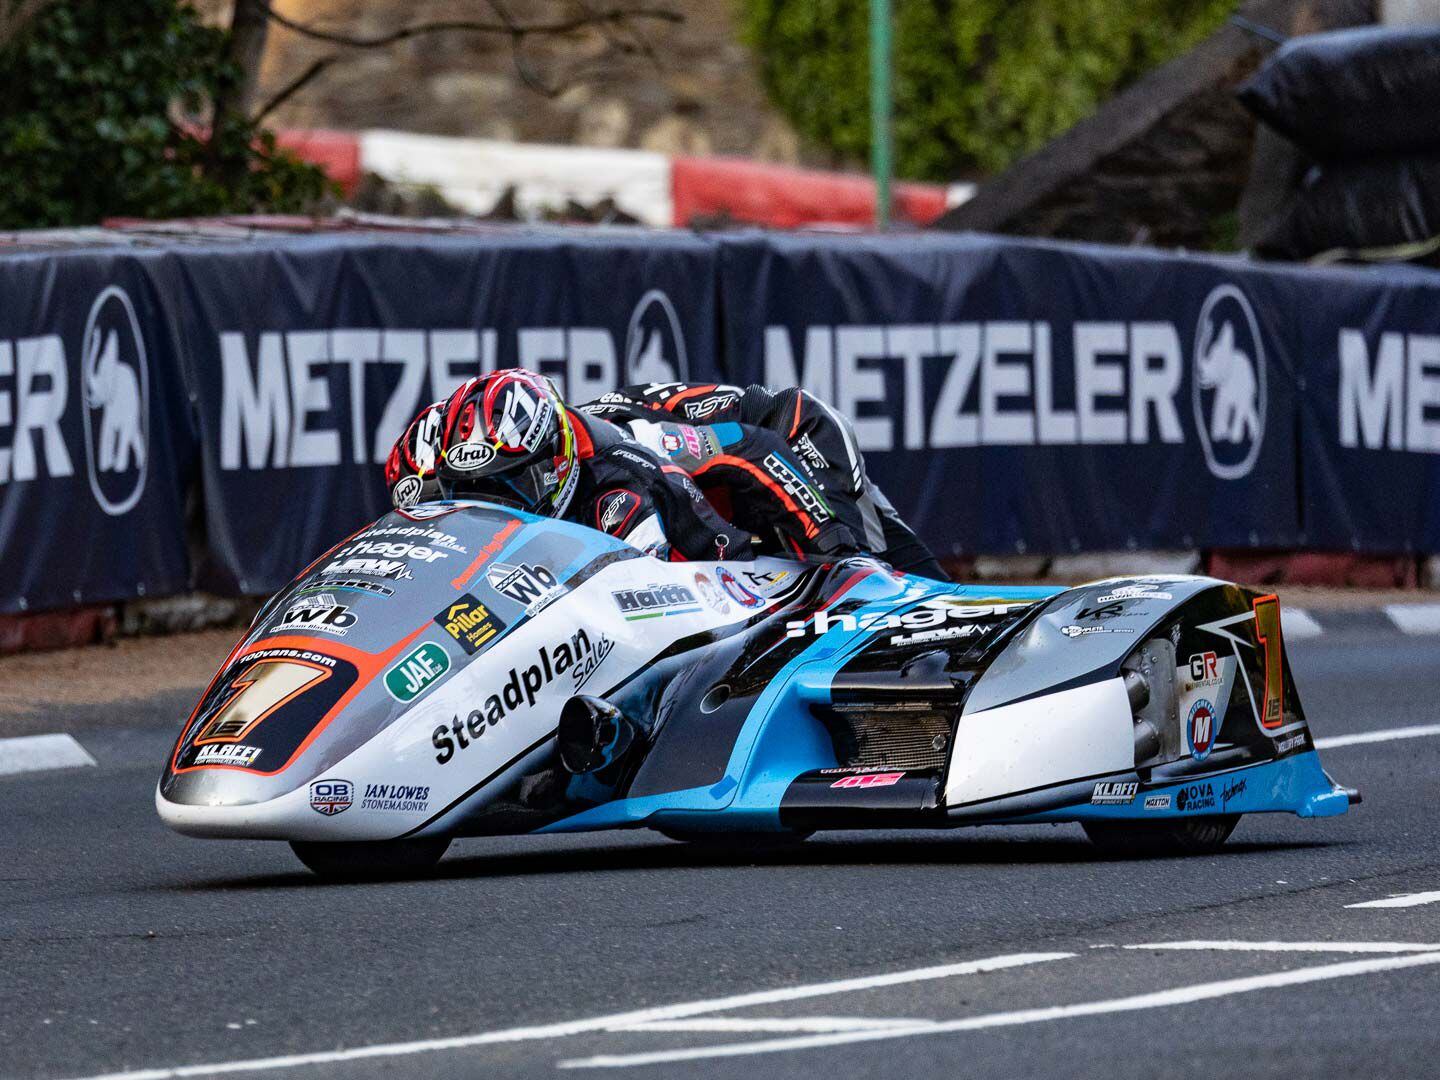 Brothers Ben and Tom Birchall began their TT career in 2009. They continued their Honda-powered winning streak now at 14, and posted a new lap record of 120.4 mph.